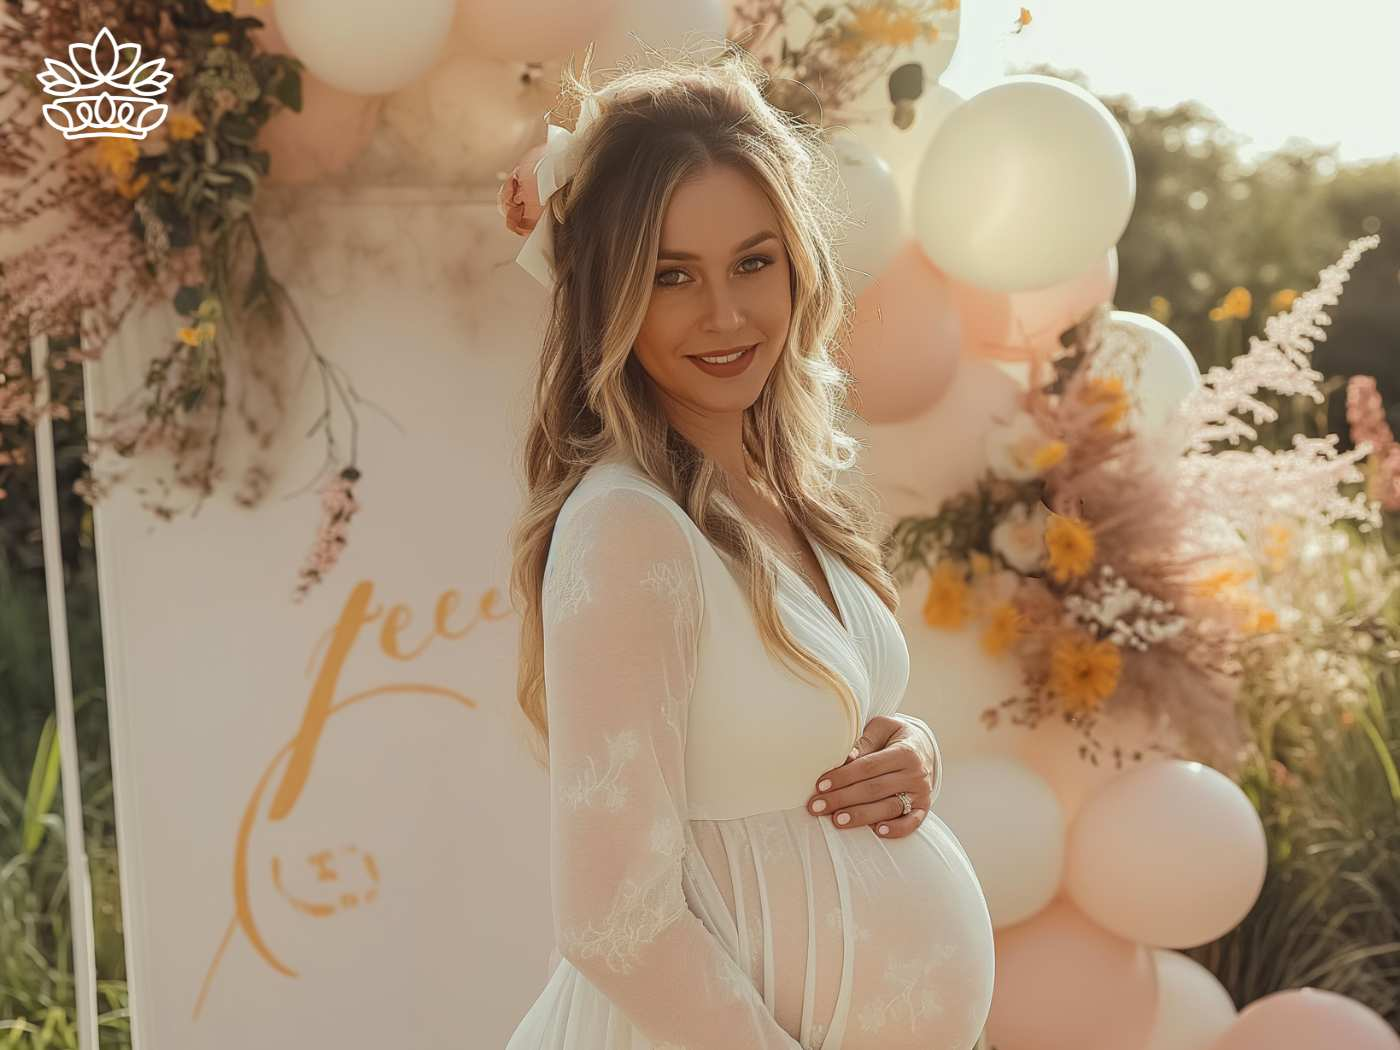 Radiant expecting mother at a baby shower adorned with lush florals and pastel balloons, celebrating a new beginning, enhanced by Fabulous Flowers and Gifts.